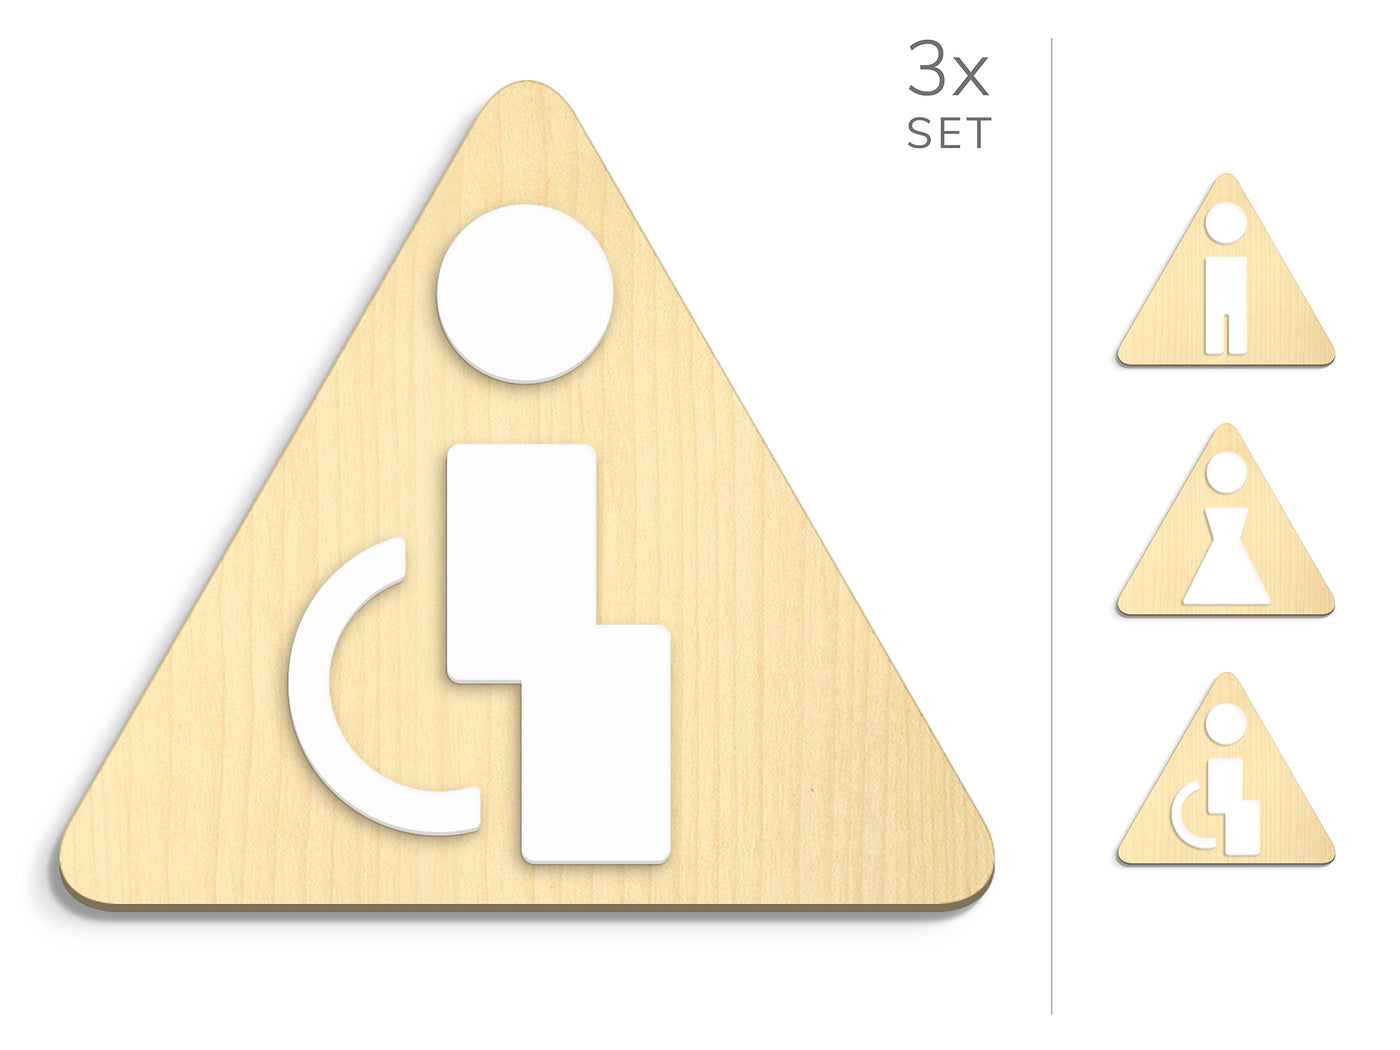 Polygonal, 3x Triangle Base - Restroom Signs Set - Man, Woman, Disabled